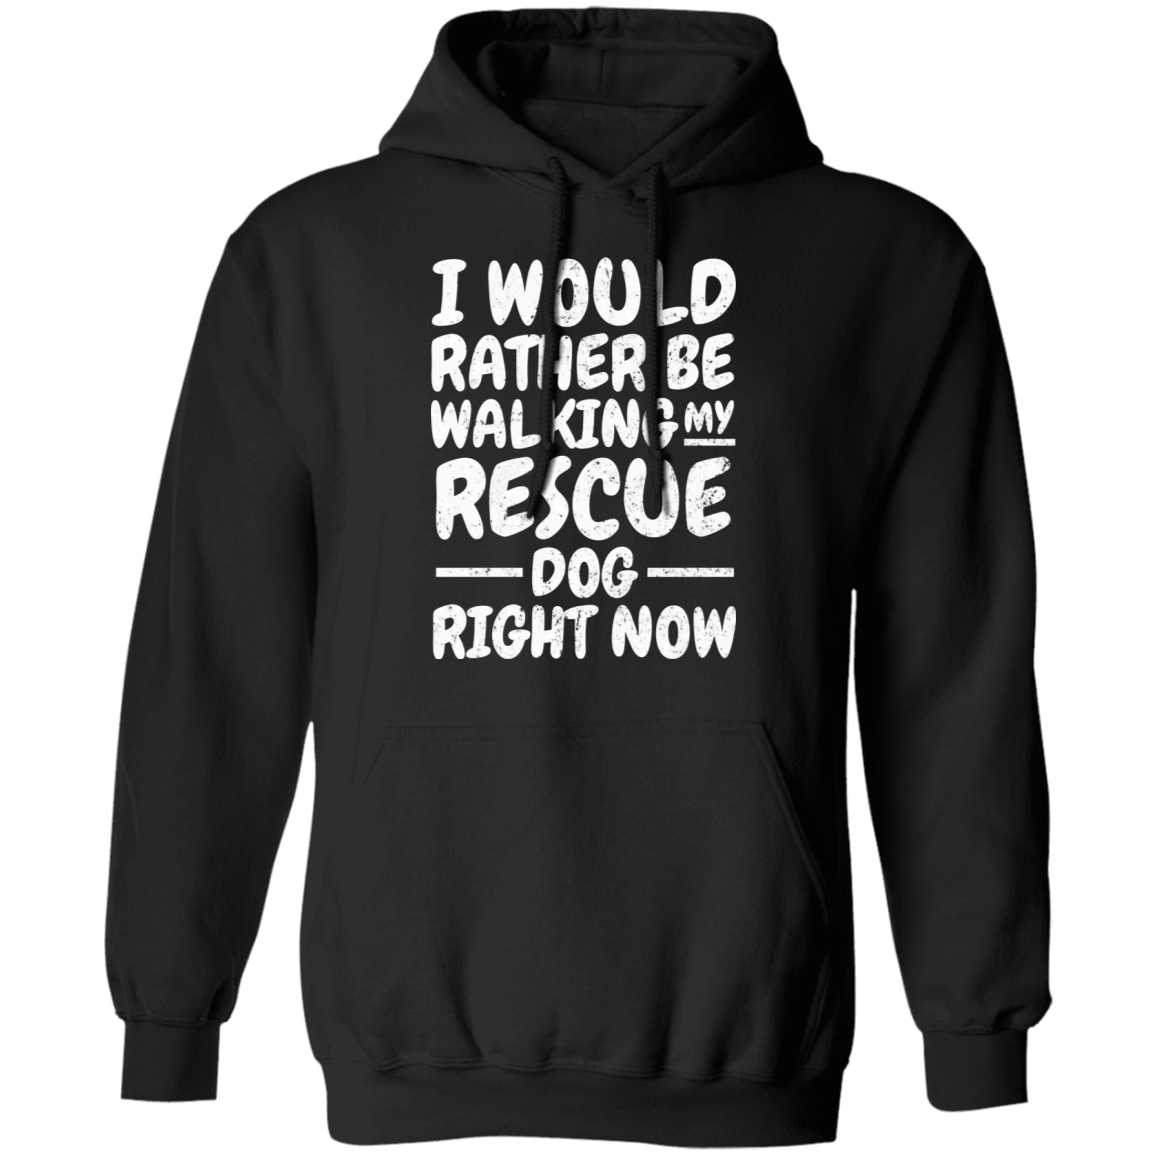 I Would Rather - Hoodie.